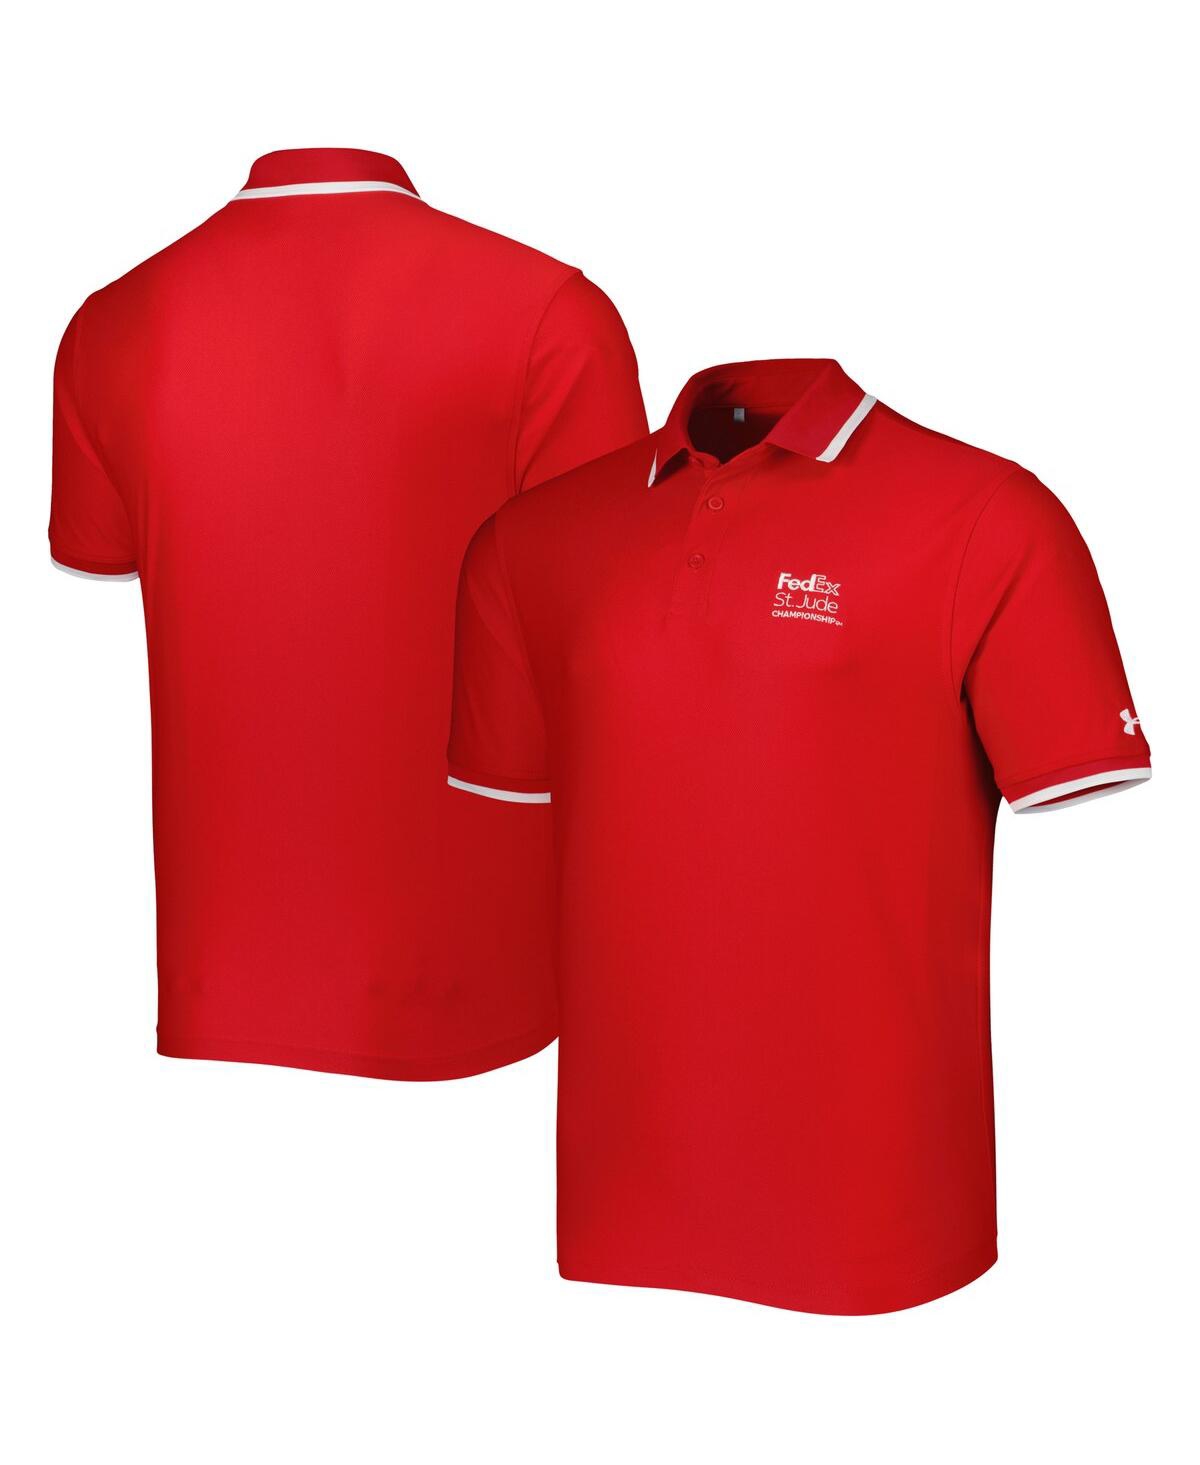 UNDER ARMOUR MEN'S UNDER ARMOUR RED FEDEX ST. JUDE CHAMPIONSHIP PLAYOFF 2.0 PERFORMANCE PIQUE POLO SHIRT